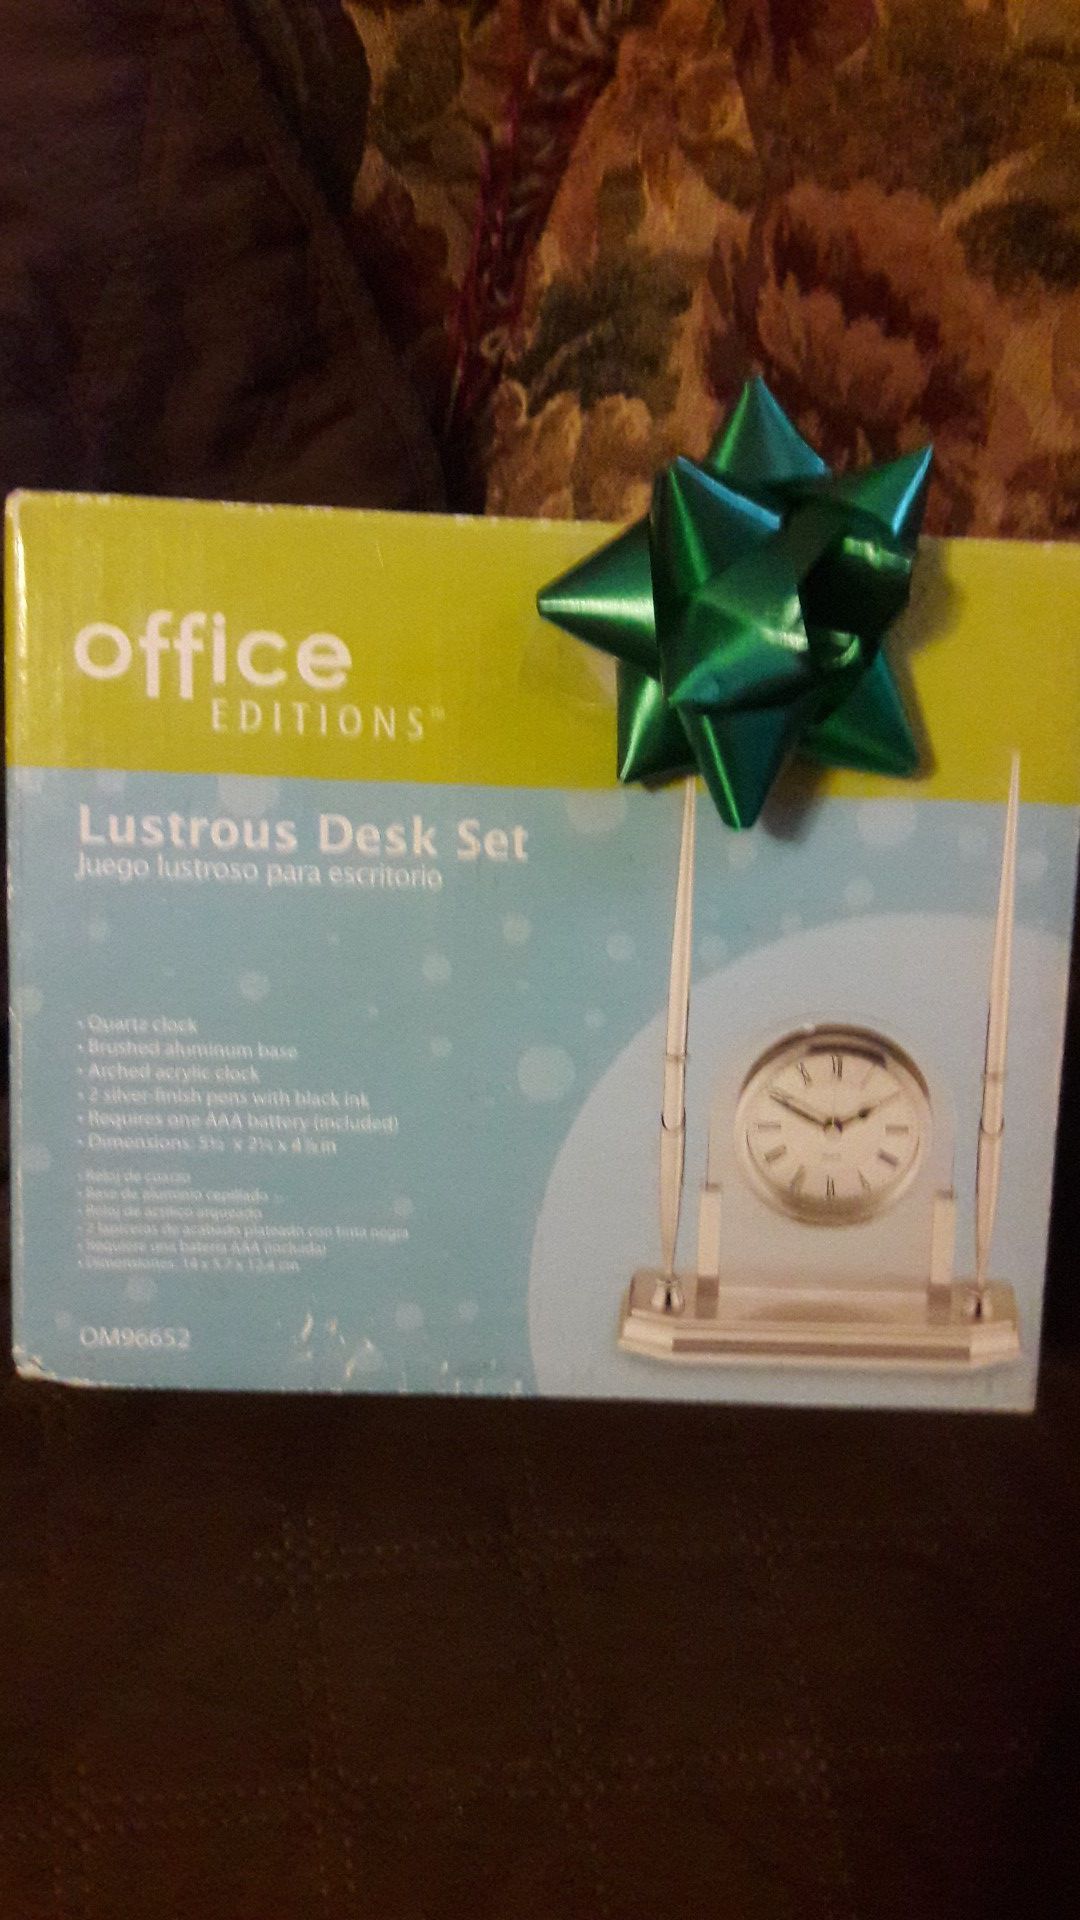 NEW Office Edition Desk Set. 2 pens and clock.